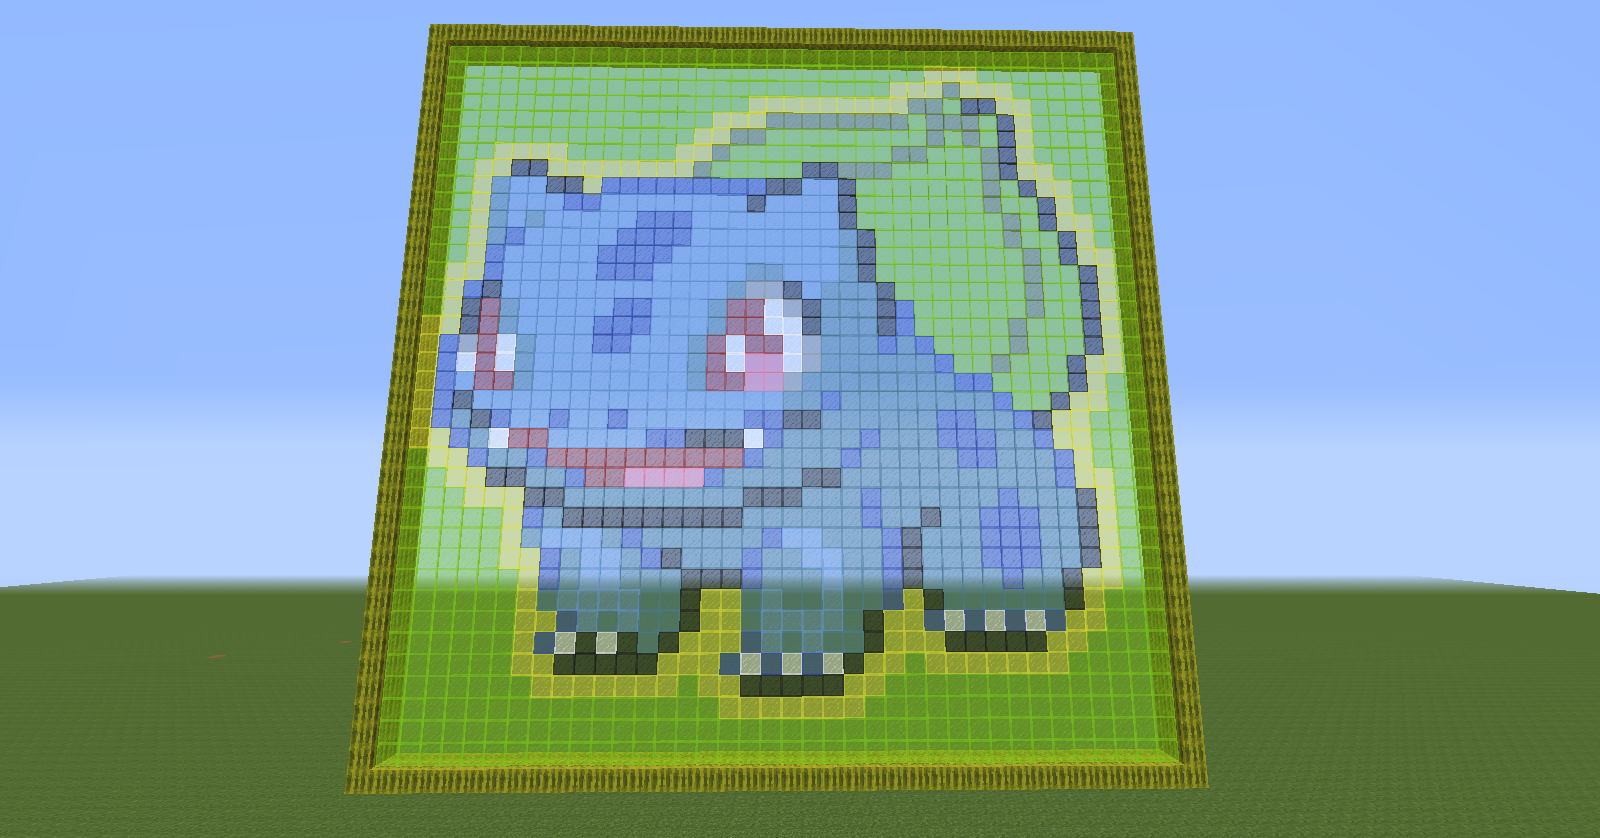 pxm_stained_glass_project___001___bulbasaur_by_waywardeclipse-d7ldfmv.png